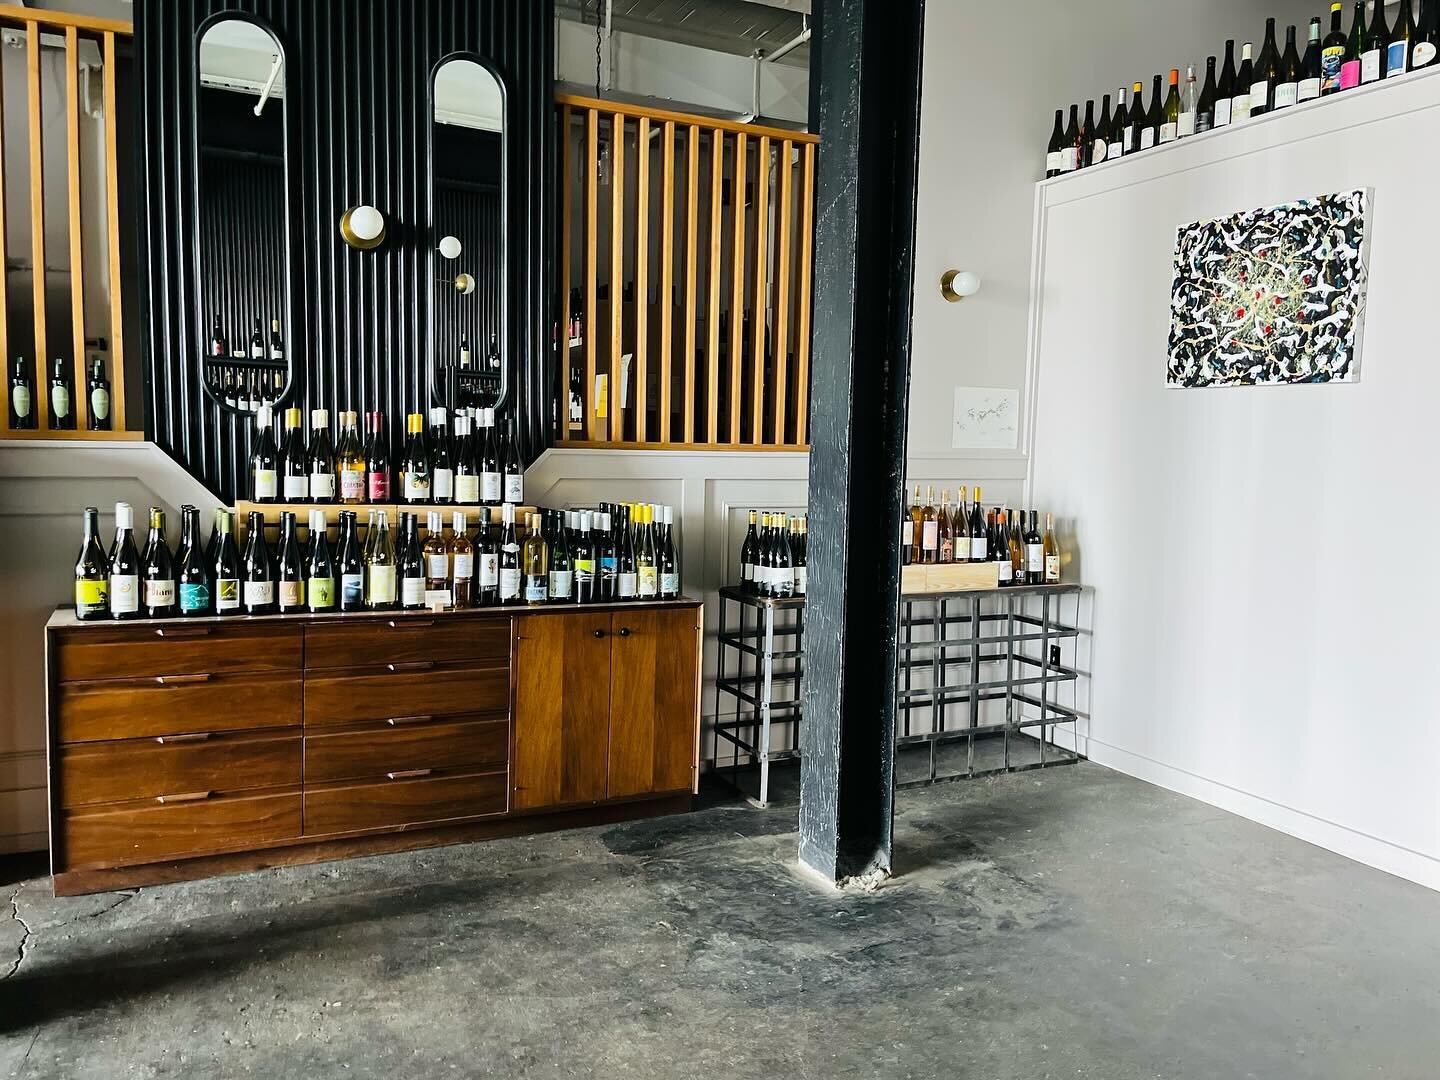 OPEN!
👇
FRI wine shop
12-6PM
👇
SAT wine shop &amp; bar
12-6PM
👇
then CLOSED for 2 weeks for spring break starting SUN 4/7-4/22! LAST CALL for lingering wine club pickups and online orders! 2 days to stock up! we hope to see your face🙃